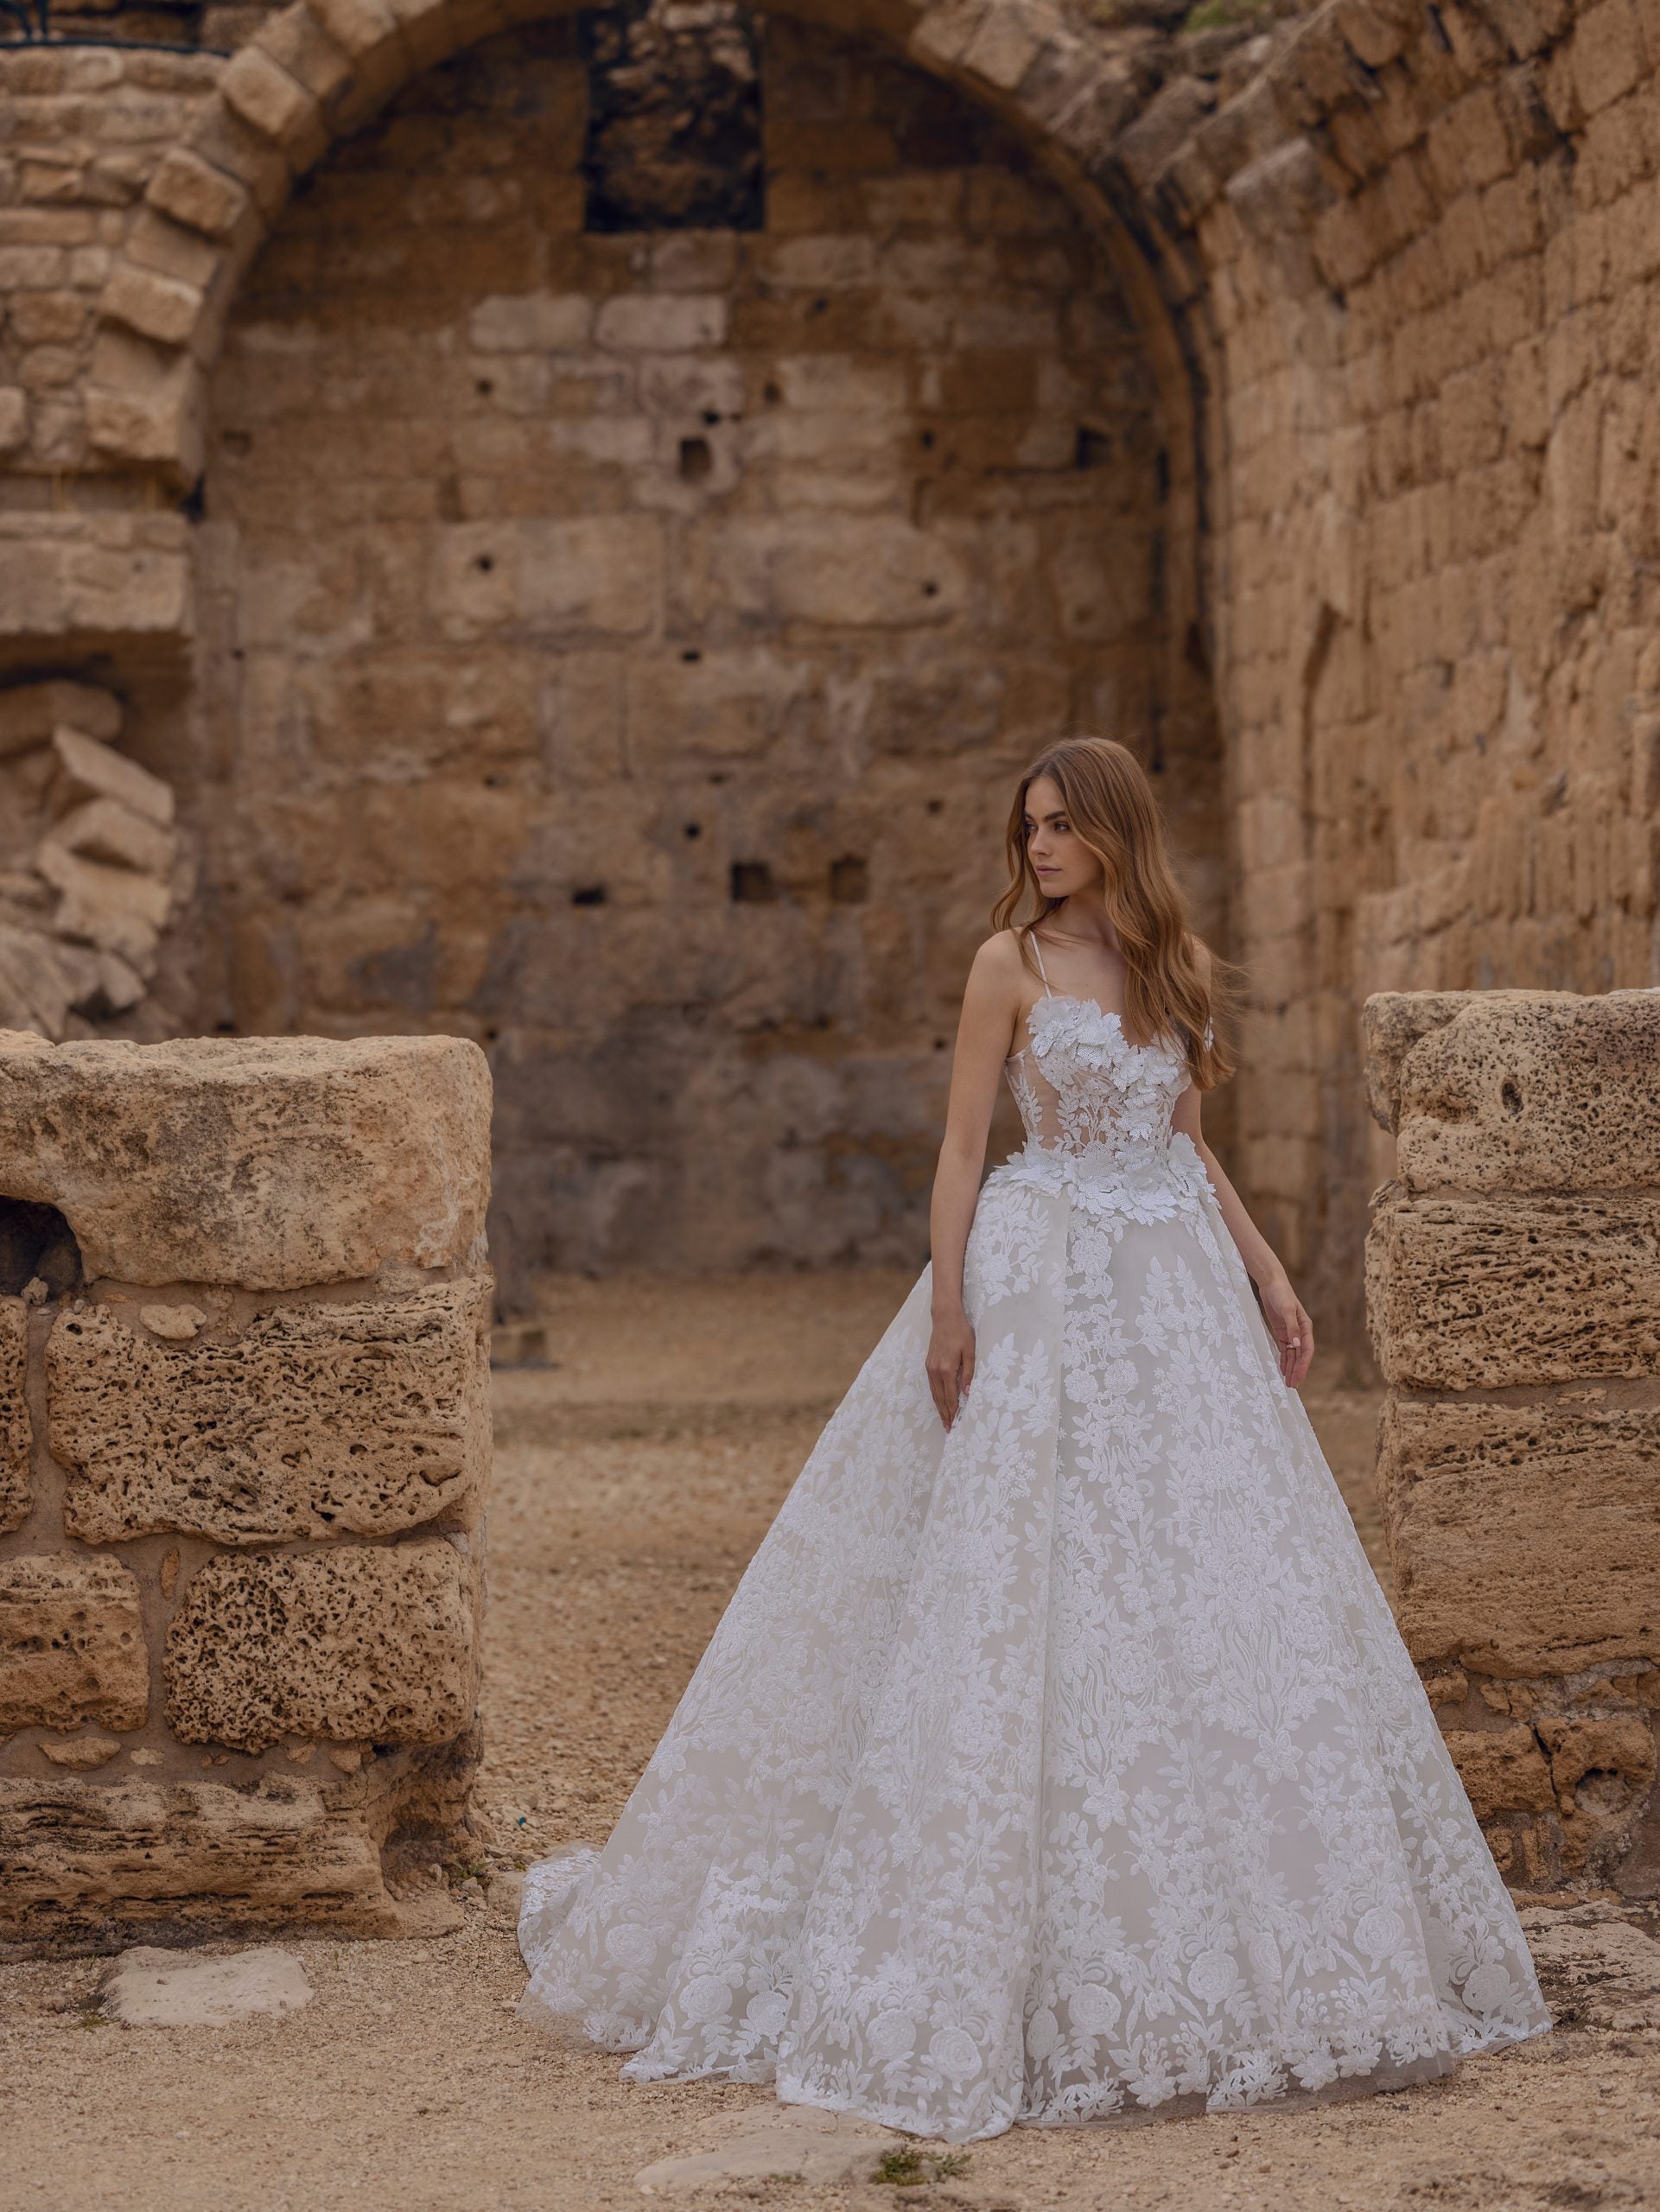 Lace Ball Gown Wedding Dress With Sweetheart Neckline by Love by Pnina Tornai - Image 1